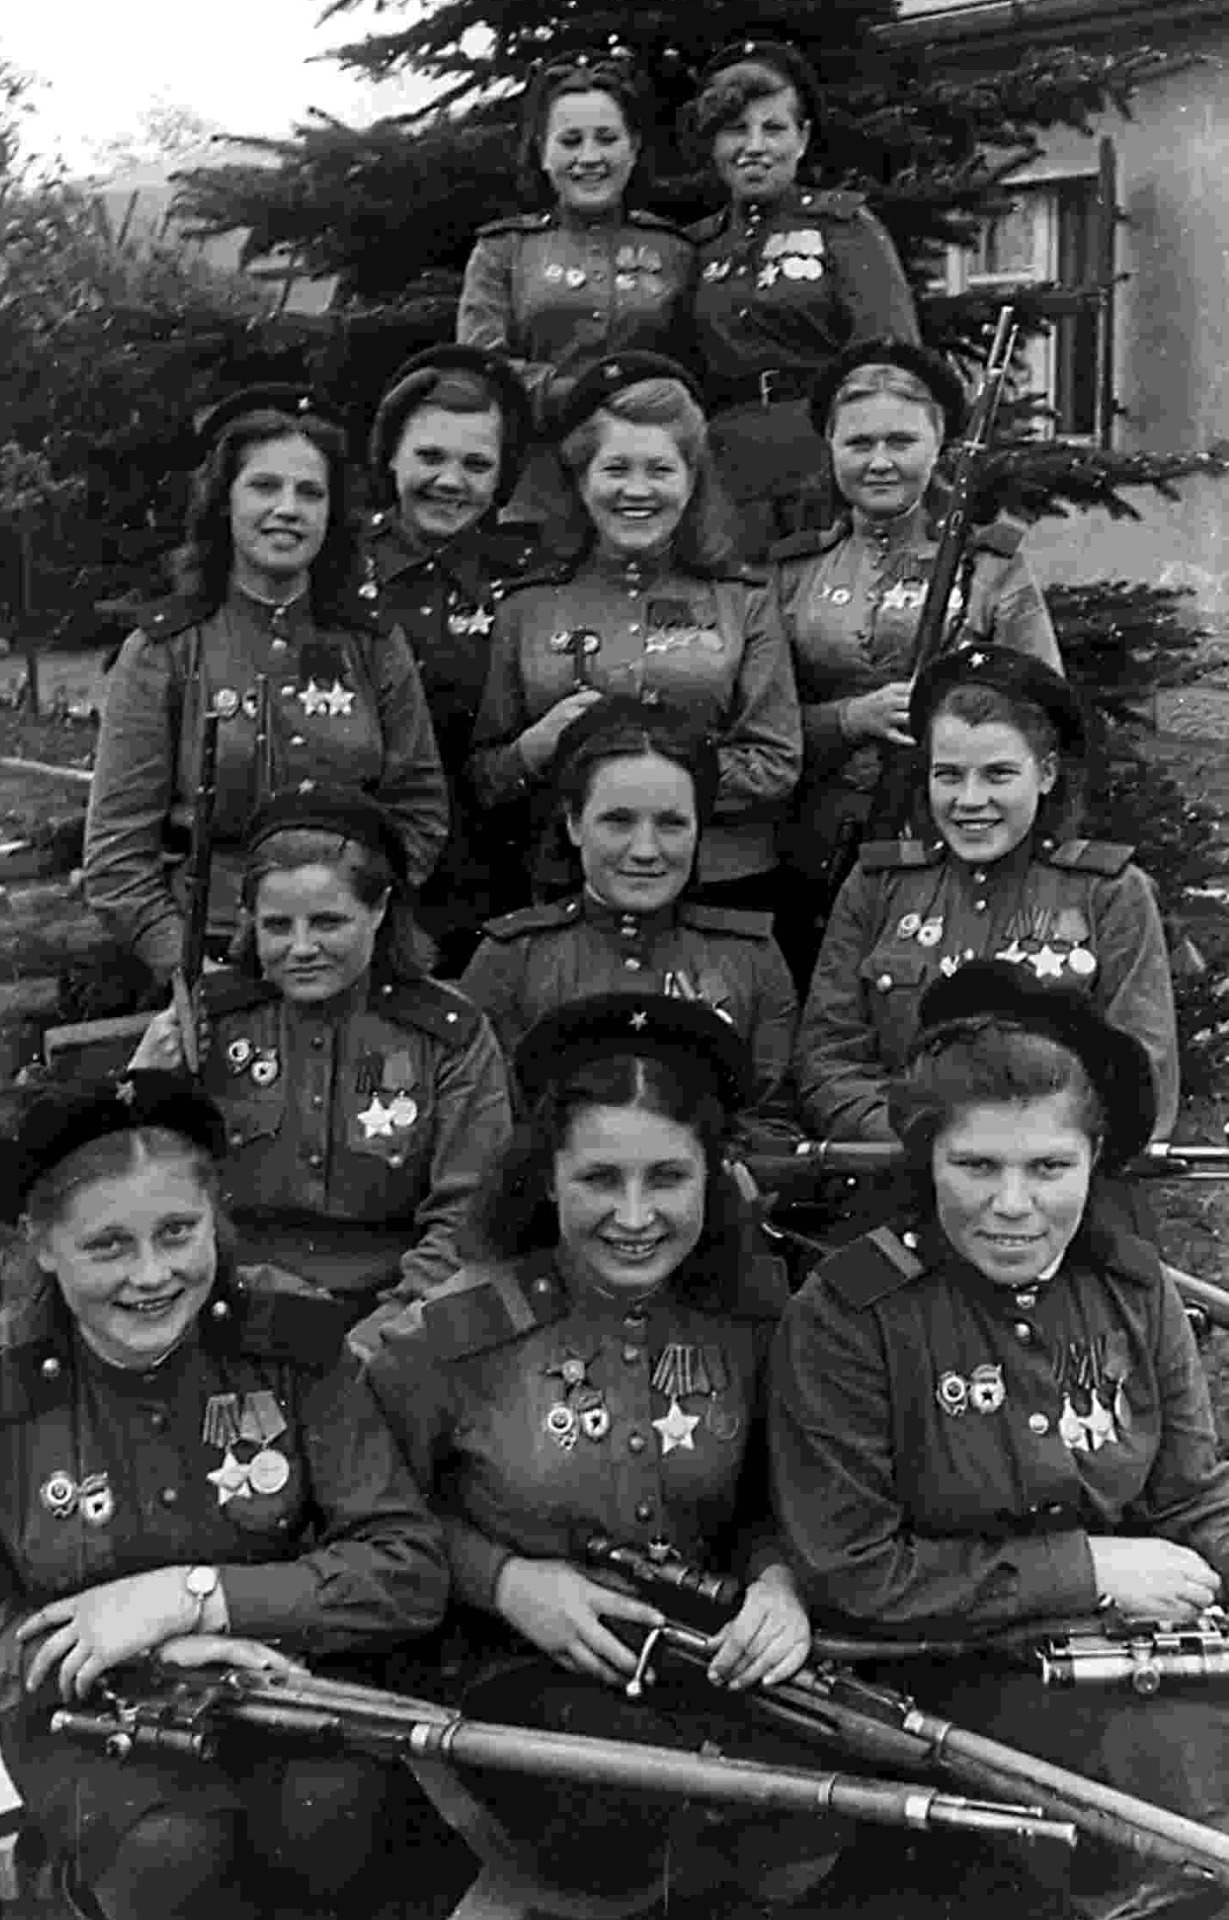 Female snipers of the Soviet 3rd Shock Army, May 4, 1945.